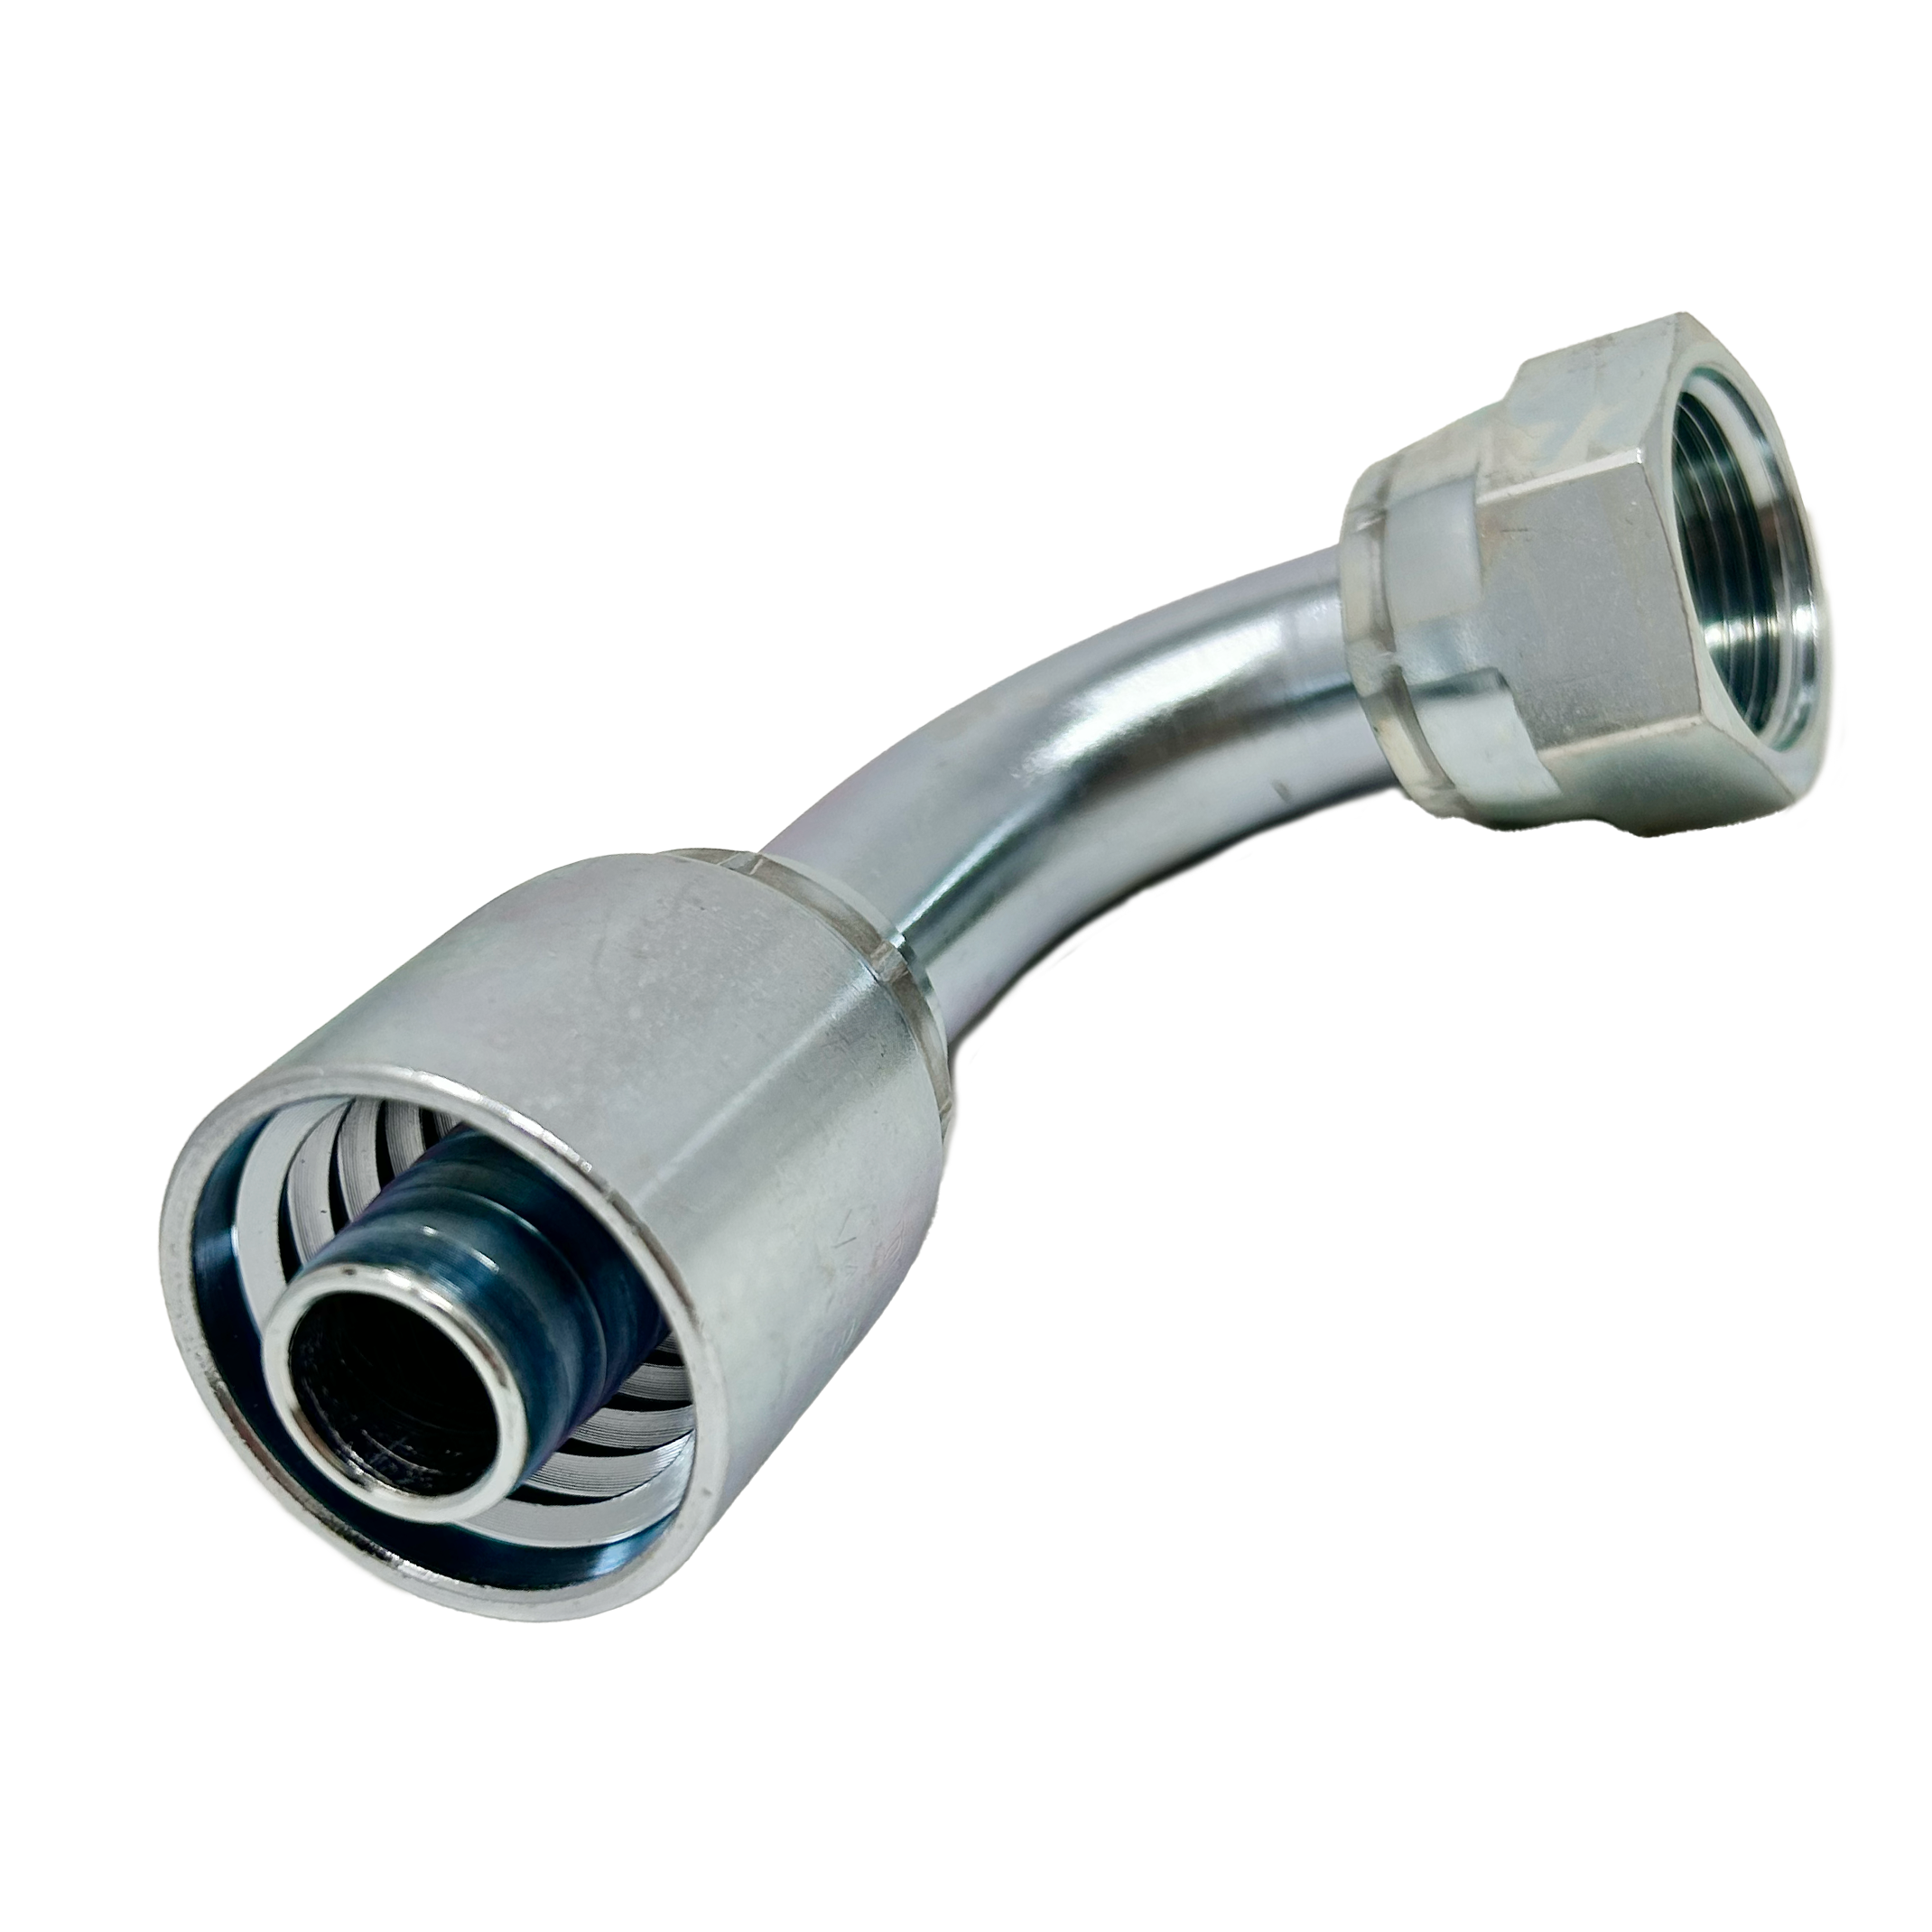 B2-OFFX90-1010: Continental Hose Fitting, 0.625 (5/8") Hose ID x 1-14 Female ORFS, 90-Degree Swivel Connection